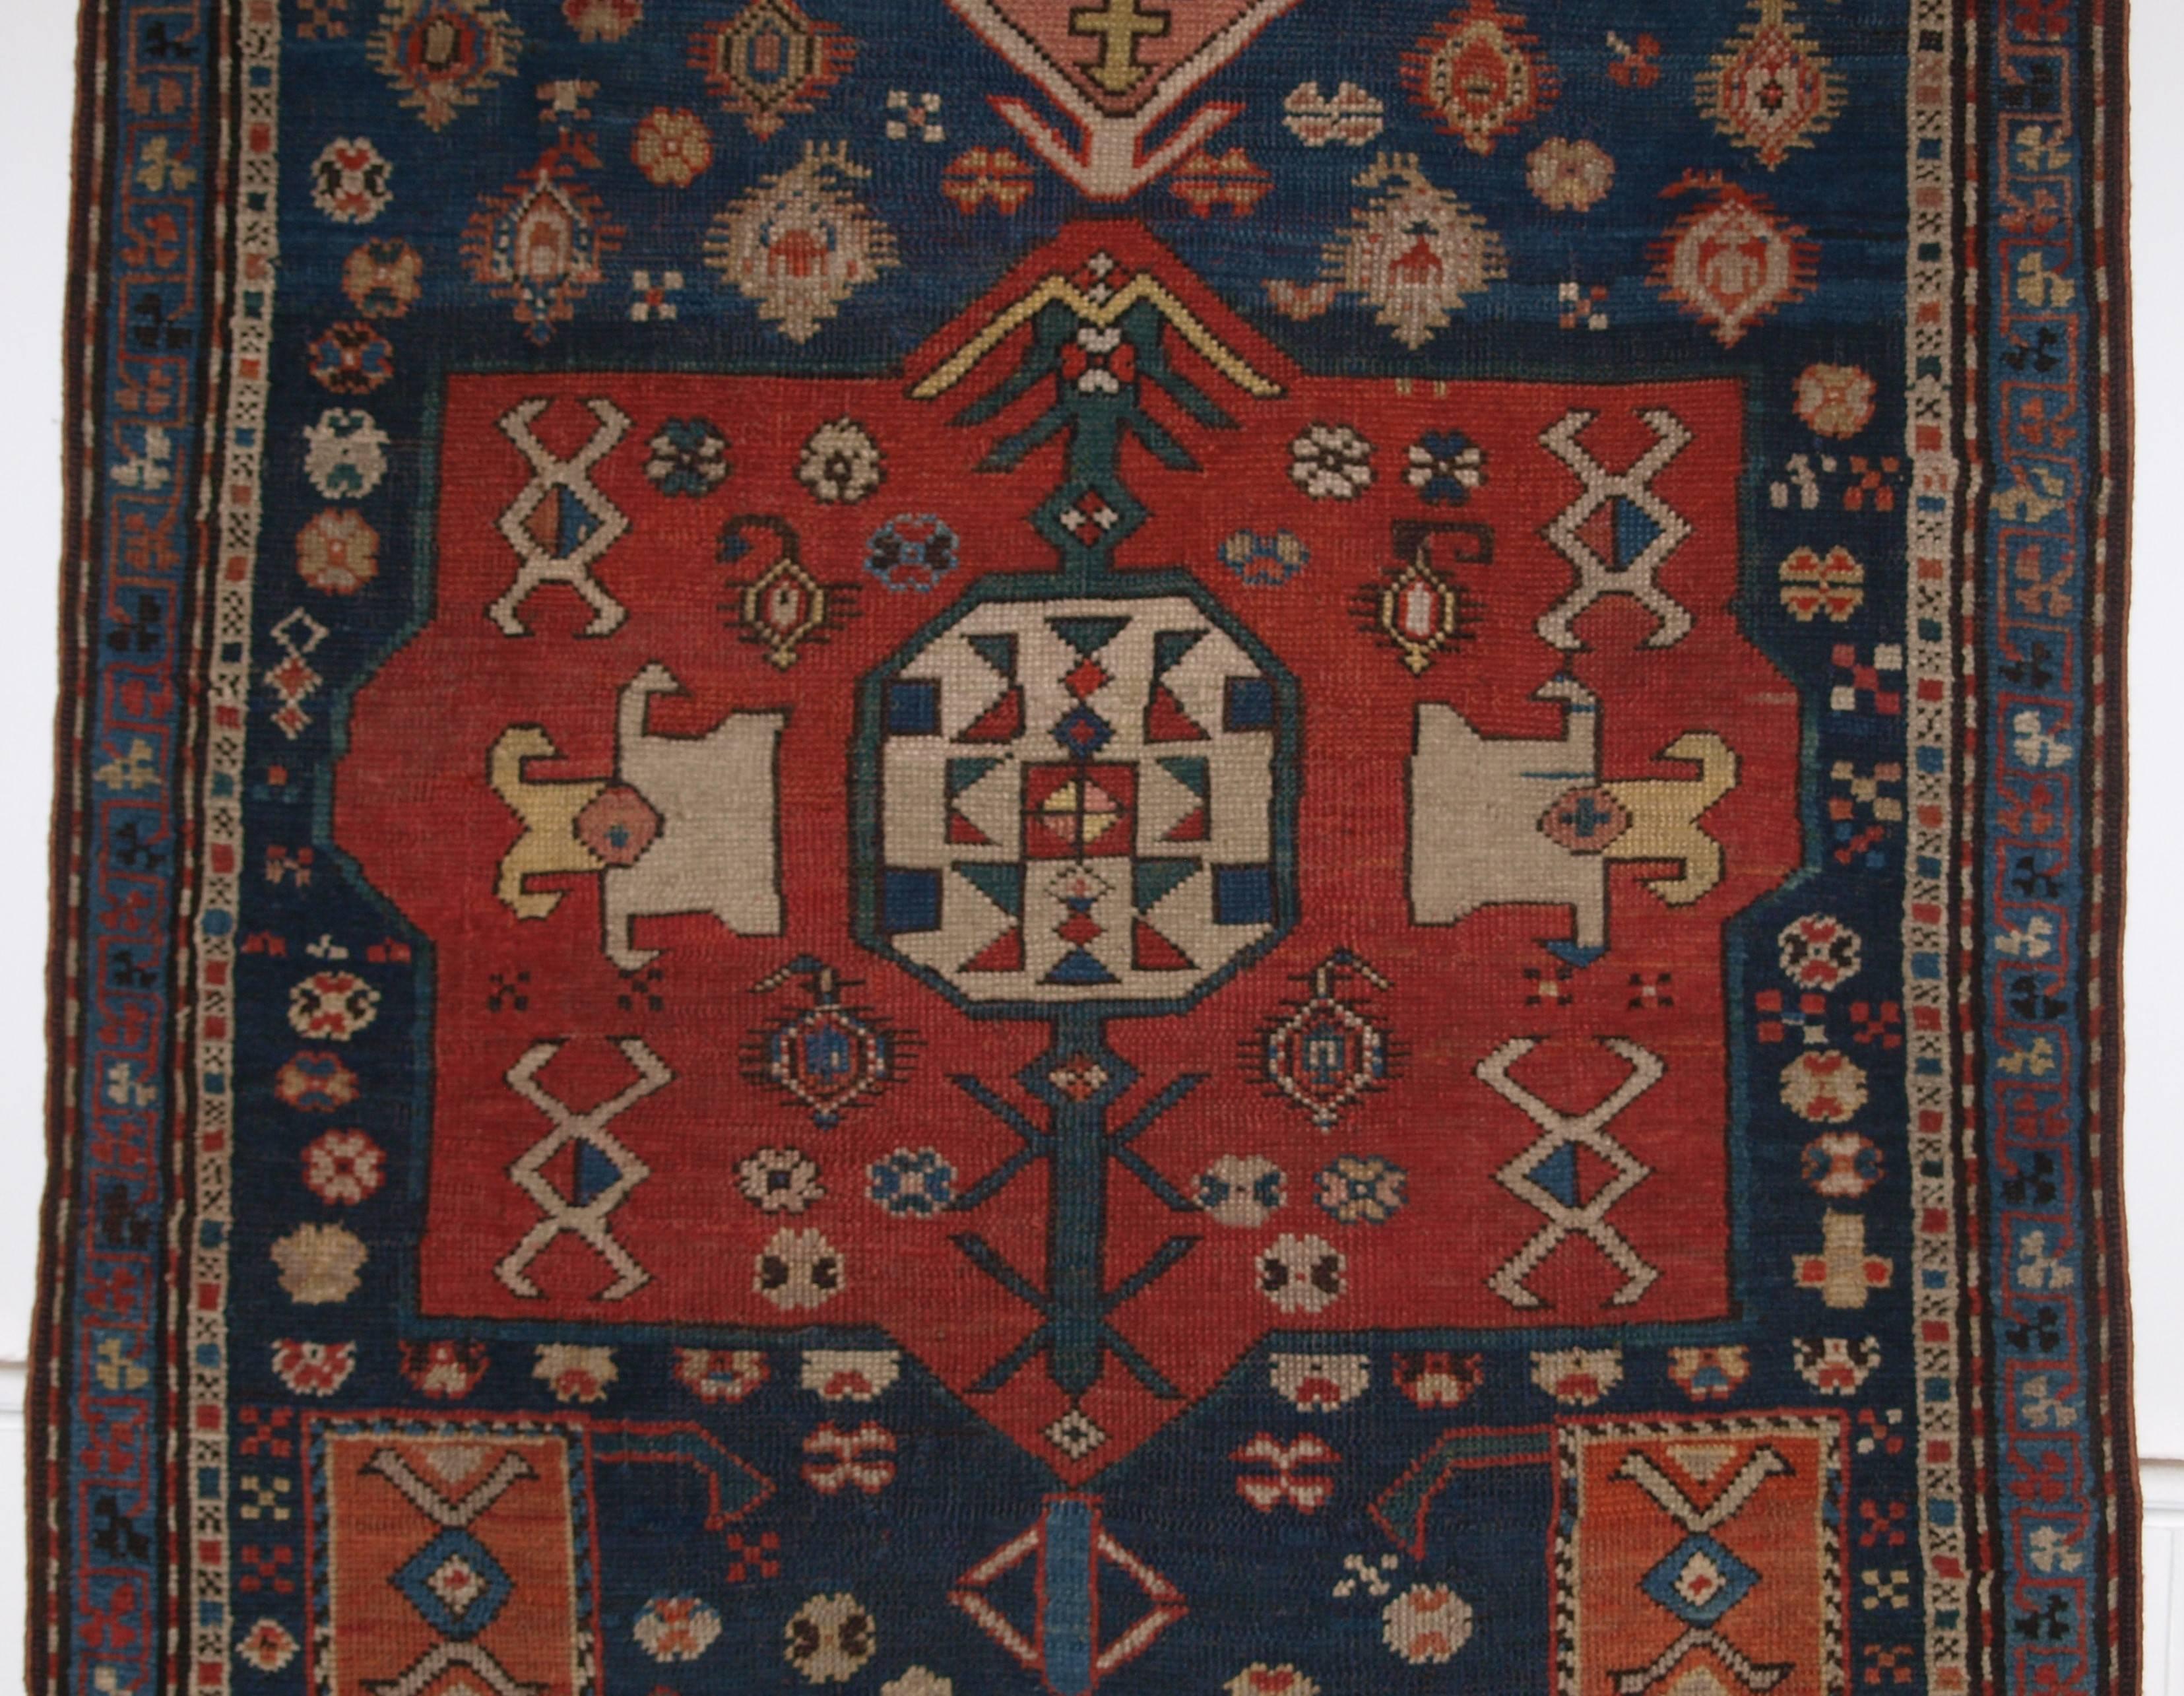 Size: 5ft 6in x 3ft 4in (167 x 101cm).

Antique Caucasian prayer rug, Karabagh region of scarce design,

late 19th century.

A superb example of a Caucasian prayer rug with very unusual bold design. Large central medallion in soft madder red